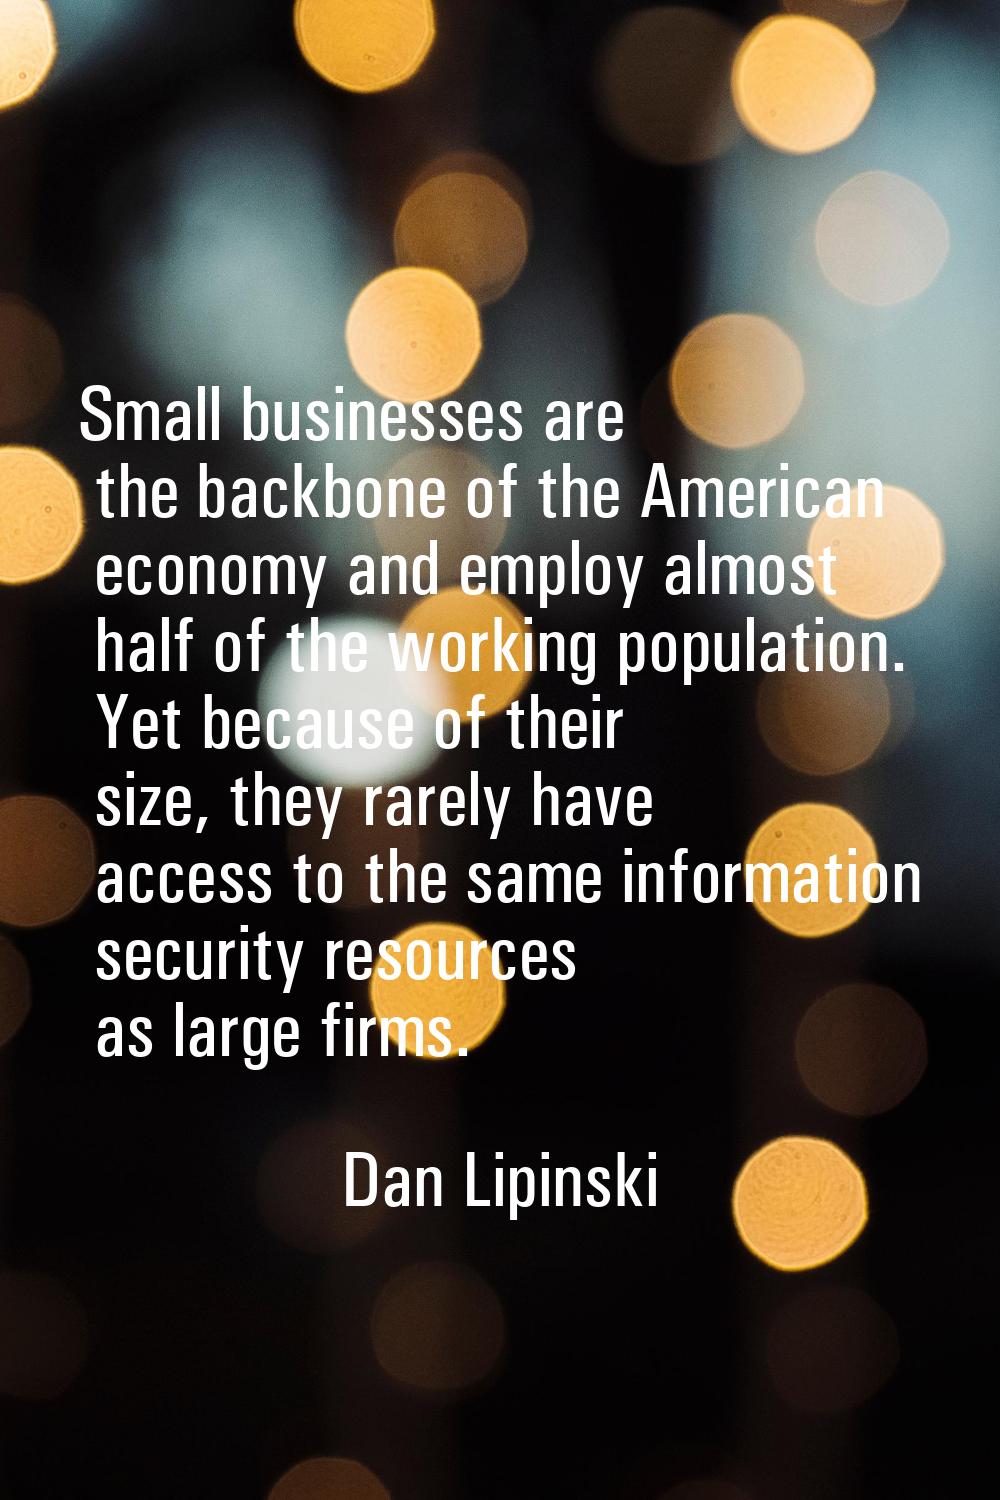 Small businesses are the backbone of the American economy and employ almost half of the working pop